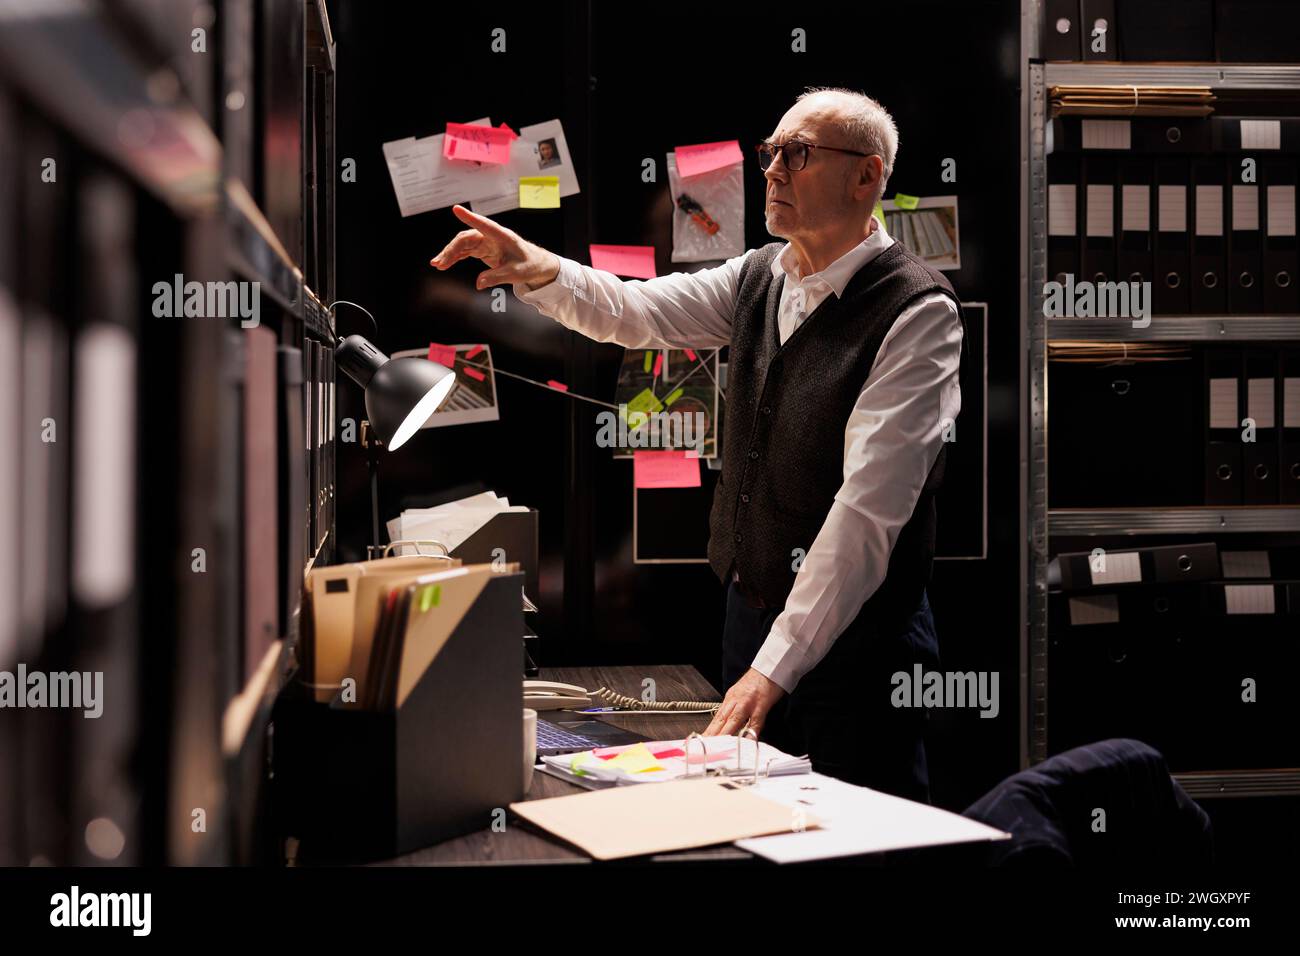 Elderly investigator working at criminal investigations case, analyzing evidence files in arhive room. Senior private detective checking criminology report, planning strategy to catch supect Stock Photo